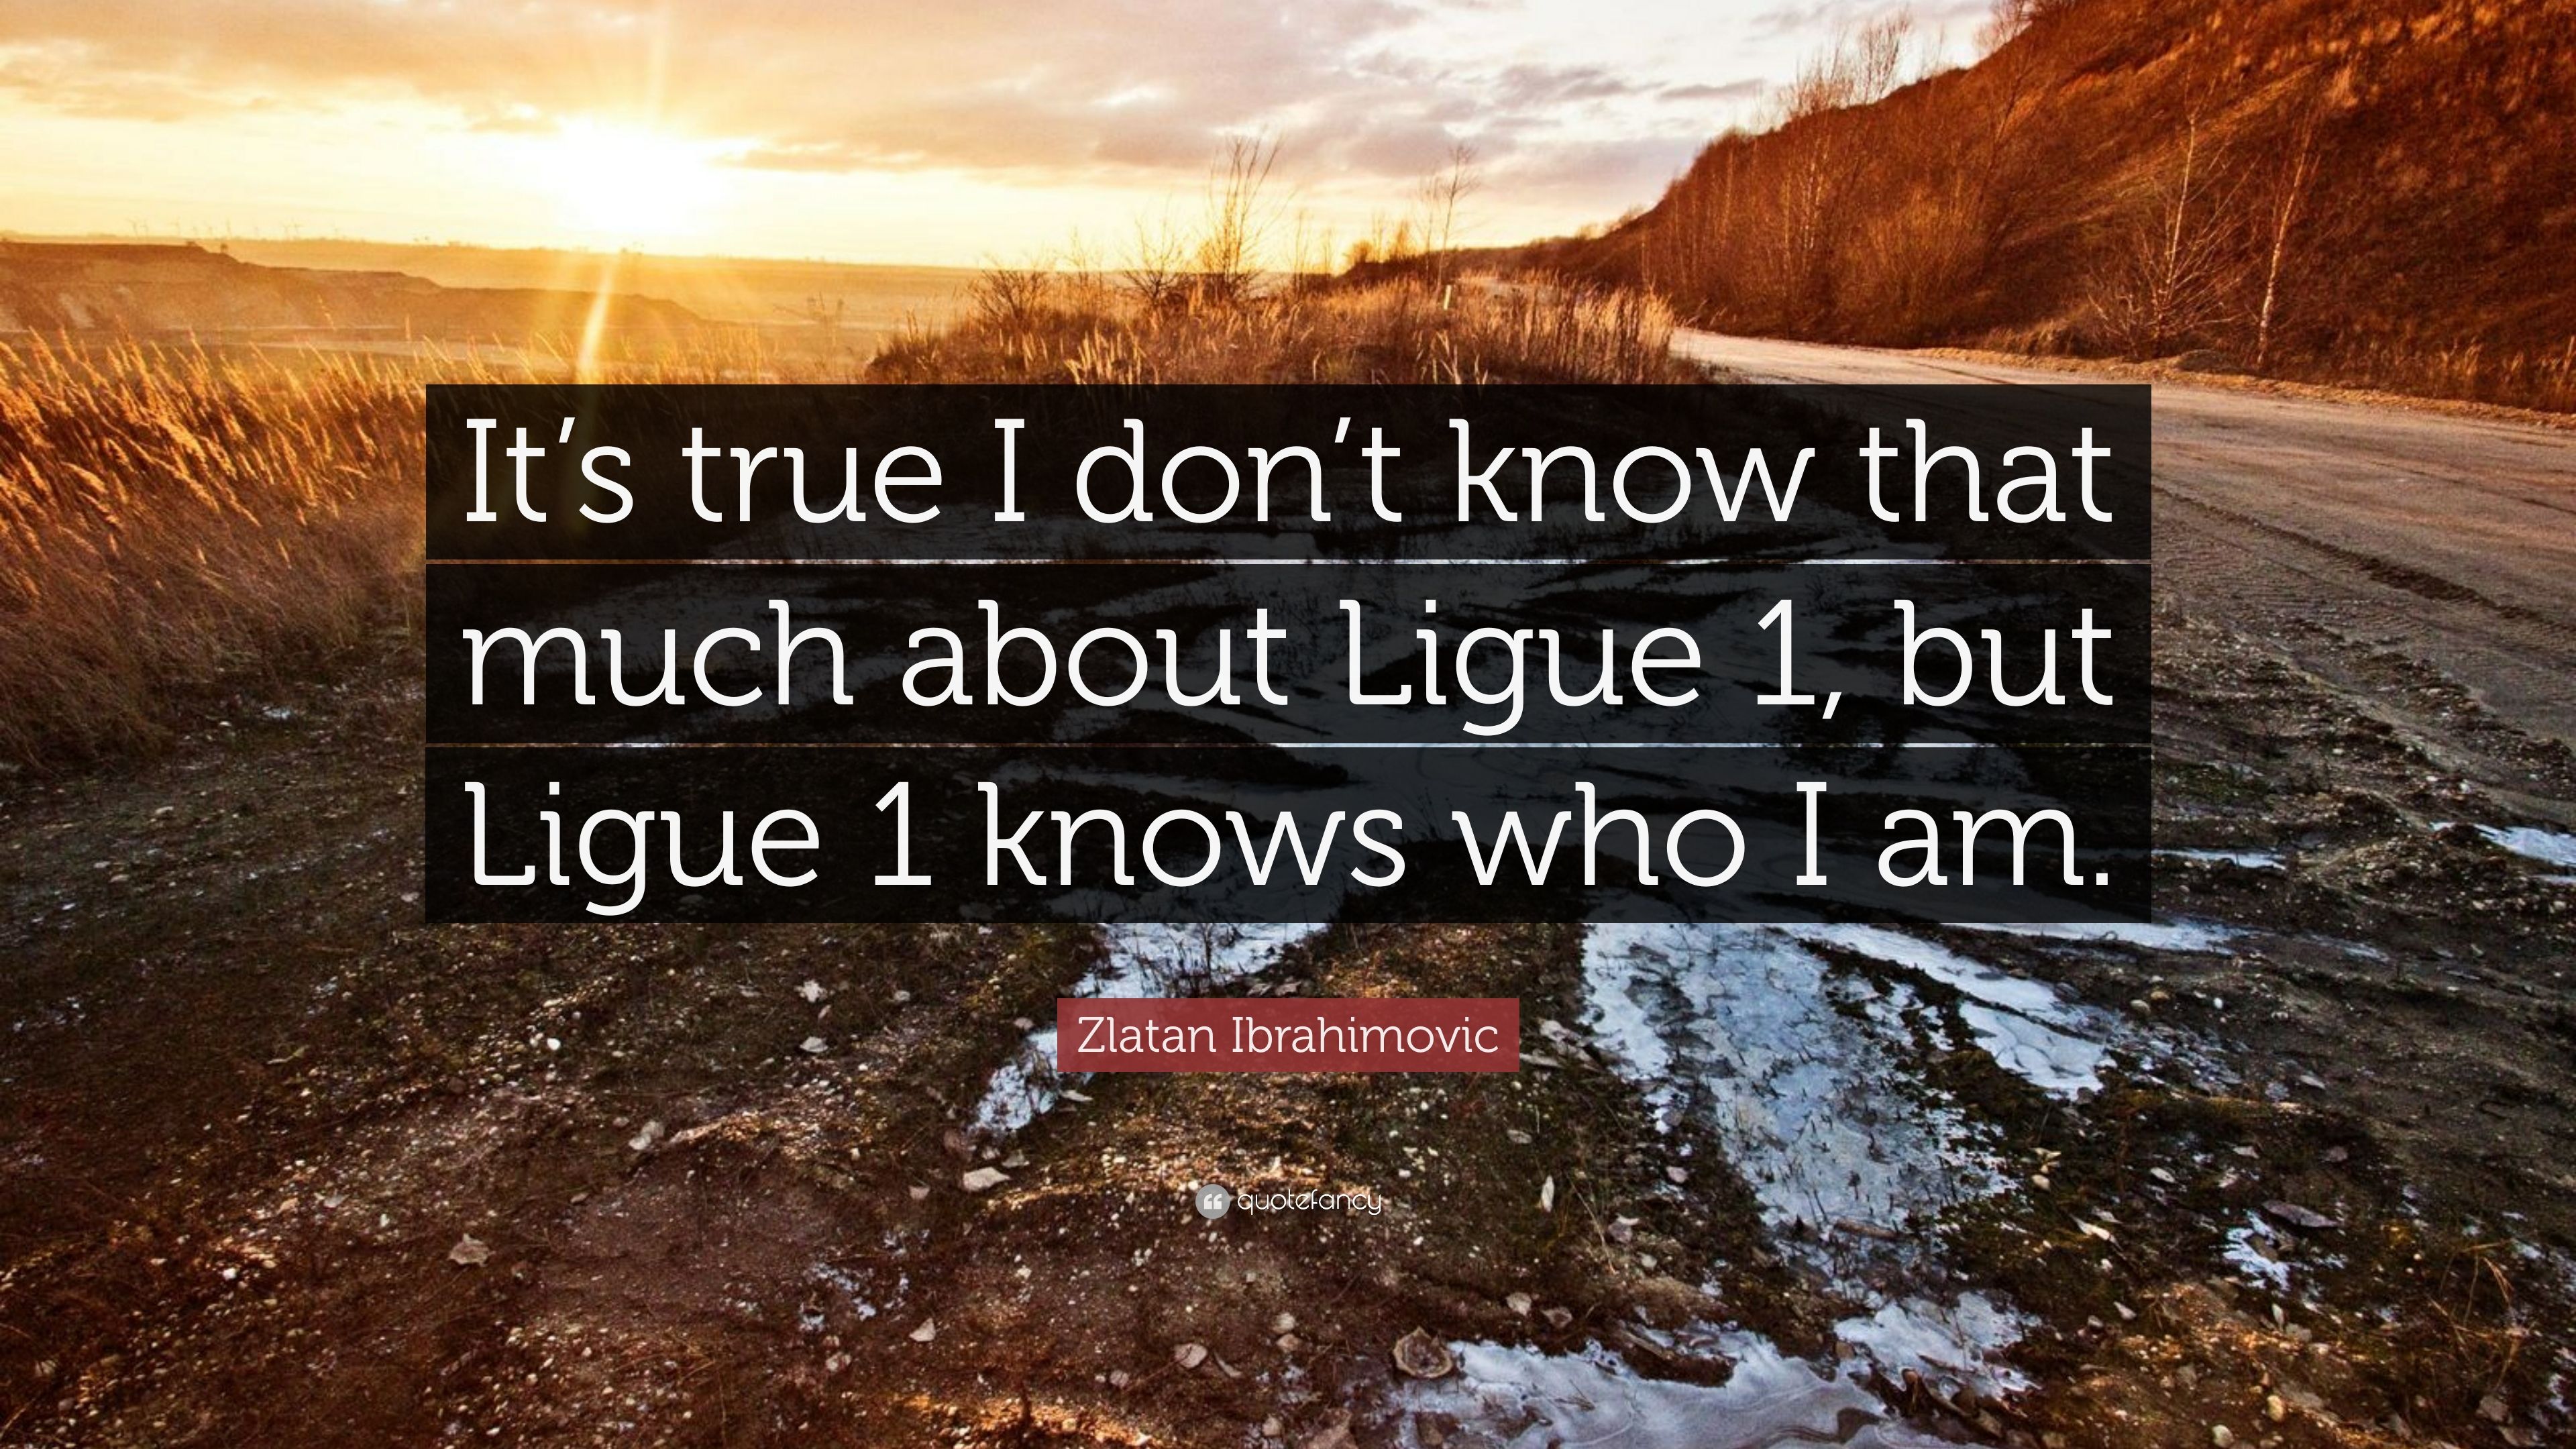 Zlatan Ibrahimovic Quote: “It's true I don't know that much about